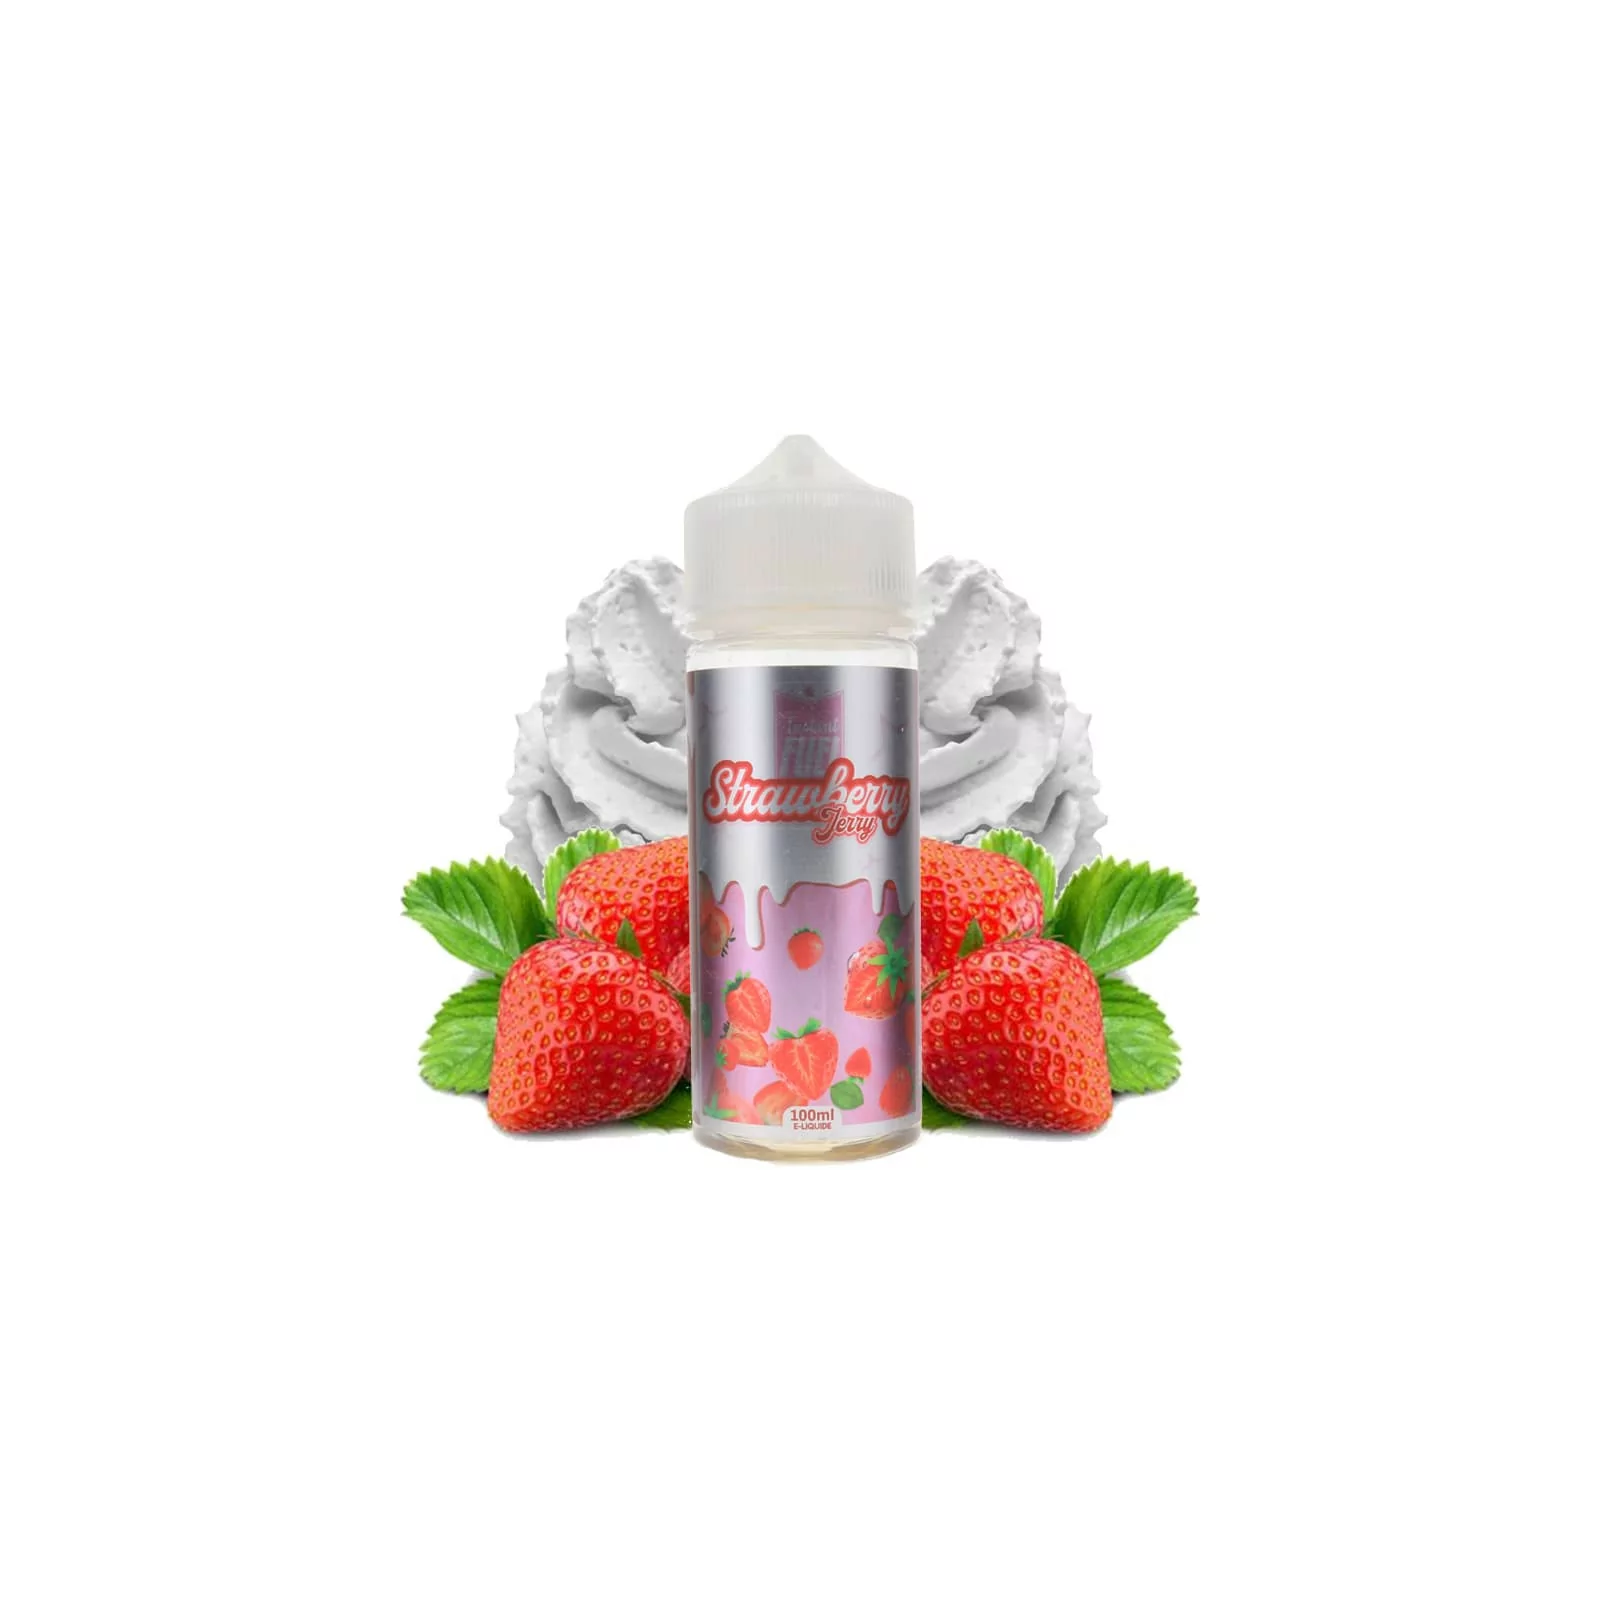 Strawberry Jerry 100 ml - Instant Fuel